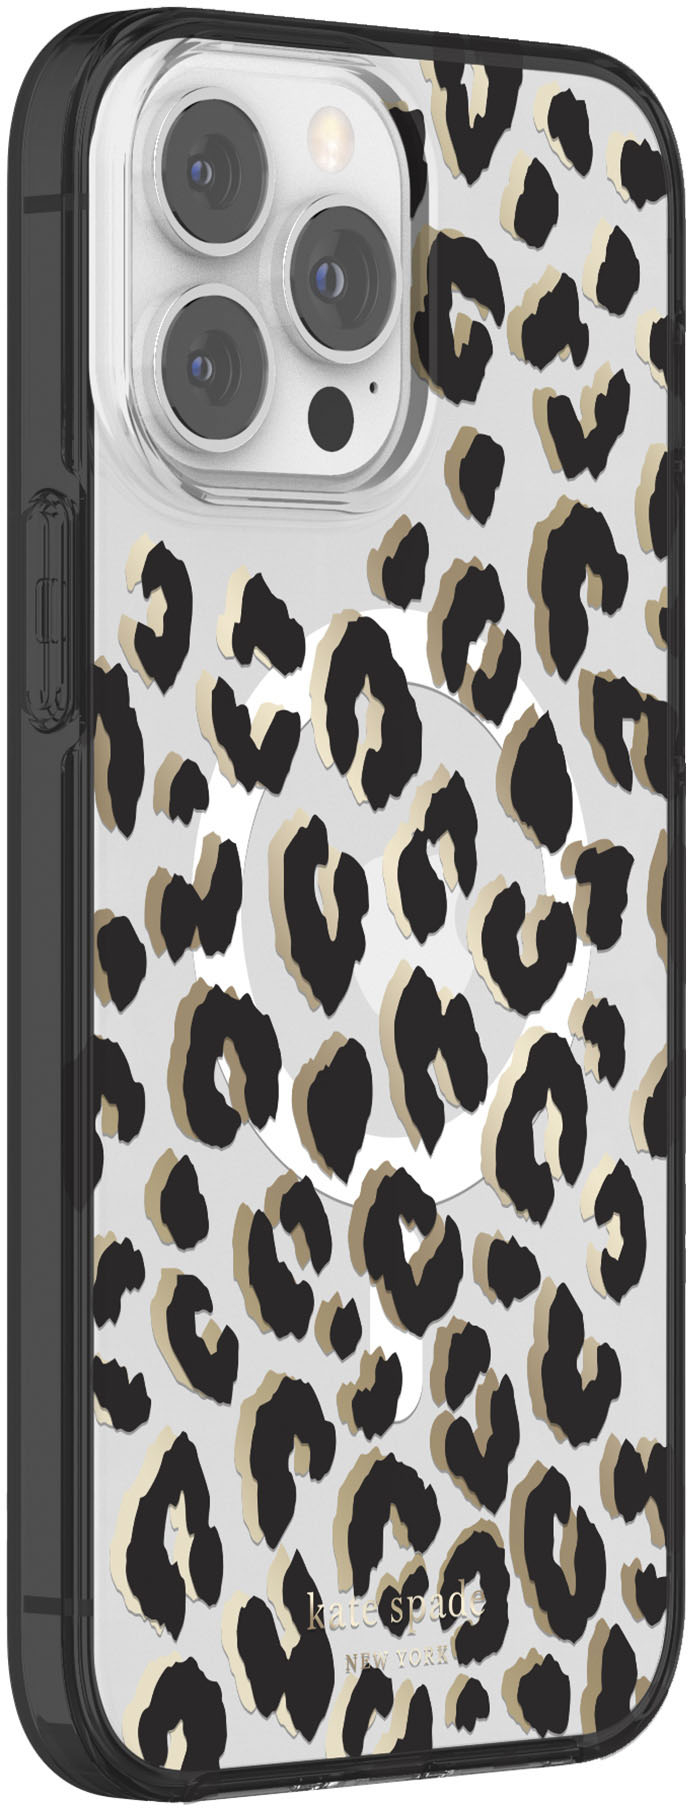 Left View: kate spade new york - Protective Hardshell Case for Apple iPhone 12 Pro Max - Clover Hearts Knockout